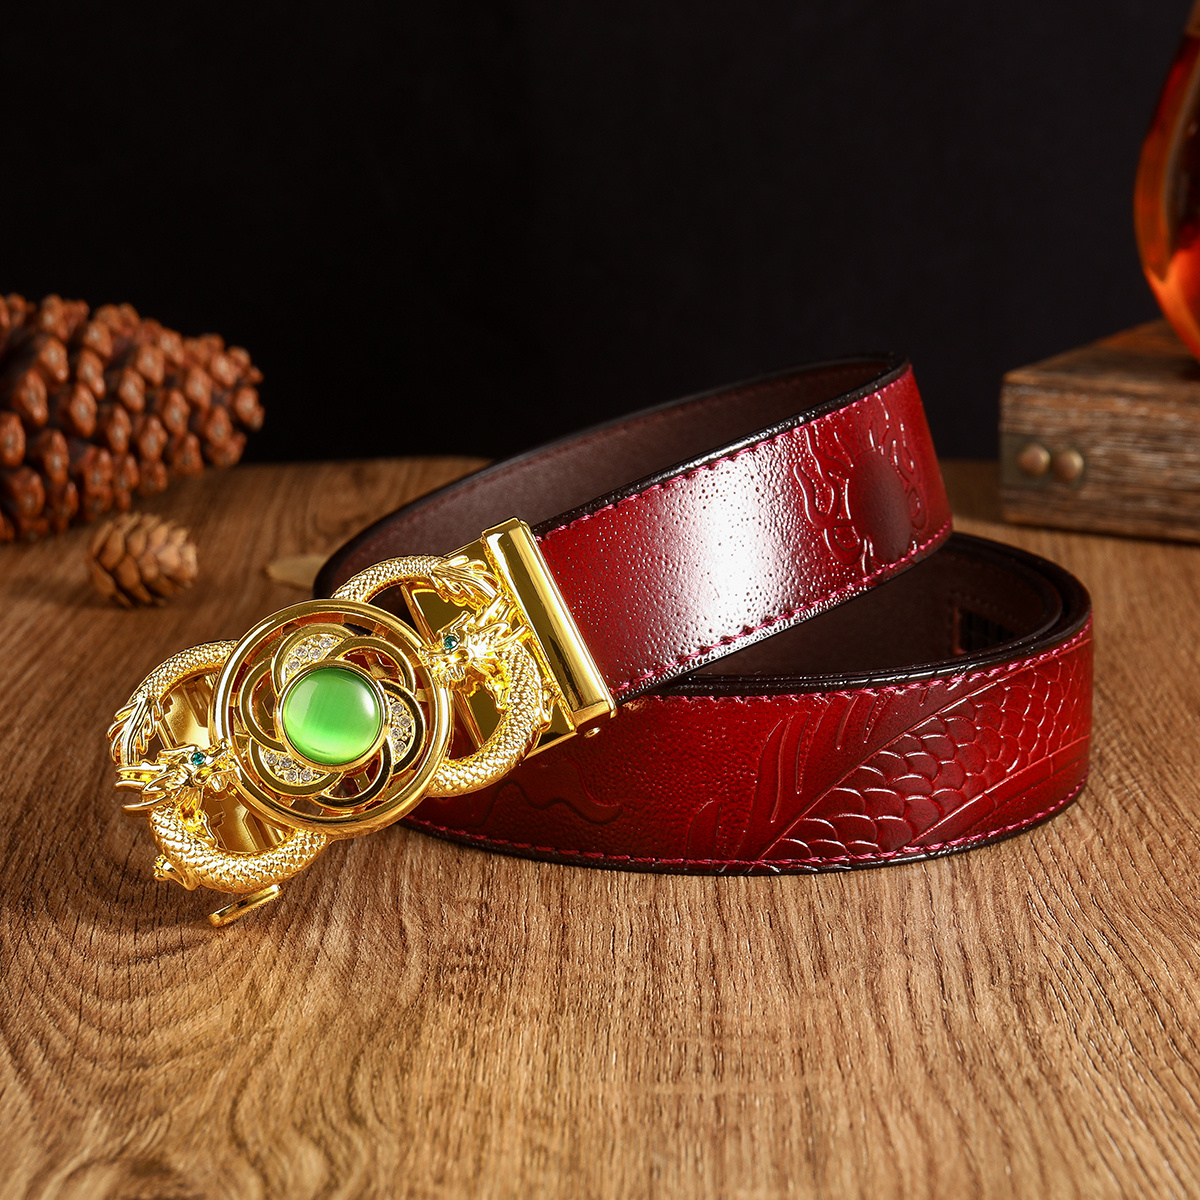 Buckle For 3.5cm Belt, Bull Head Shaped Buckle With Chinese Zodiac Design  For Men's Leather Belt, Automatic Buckle With Belt Strap Accessories